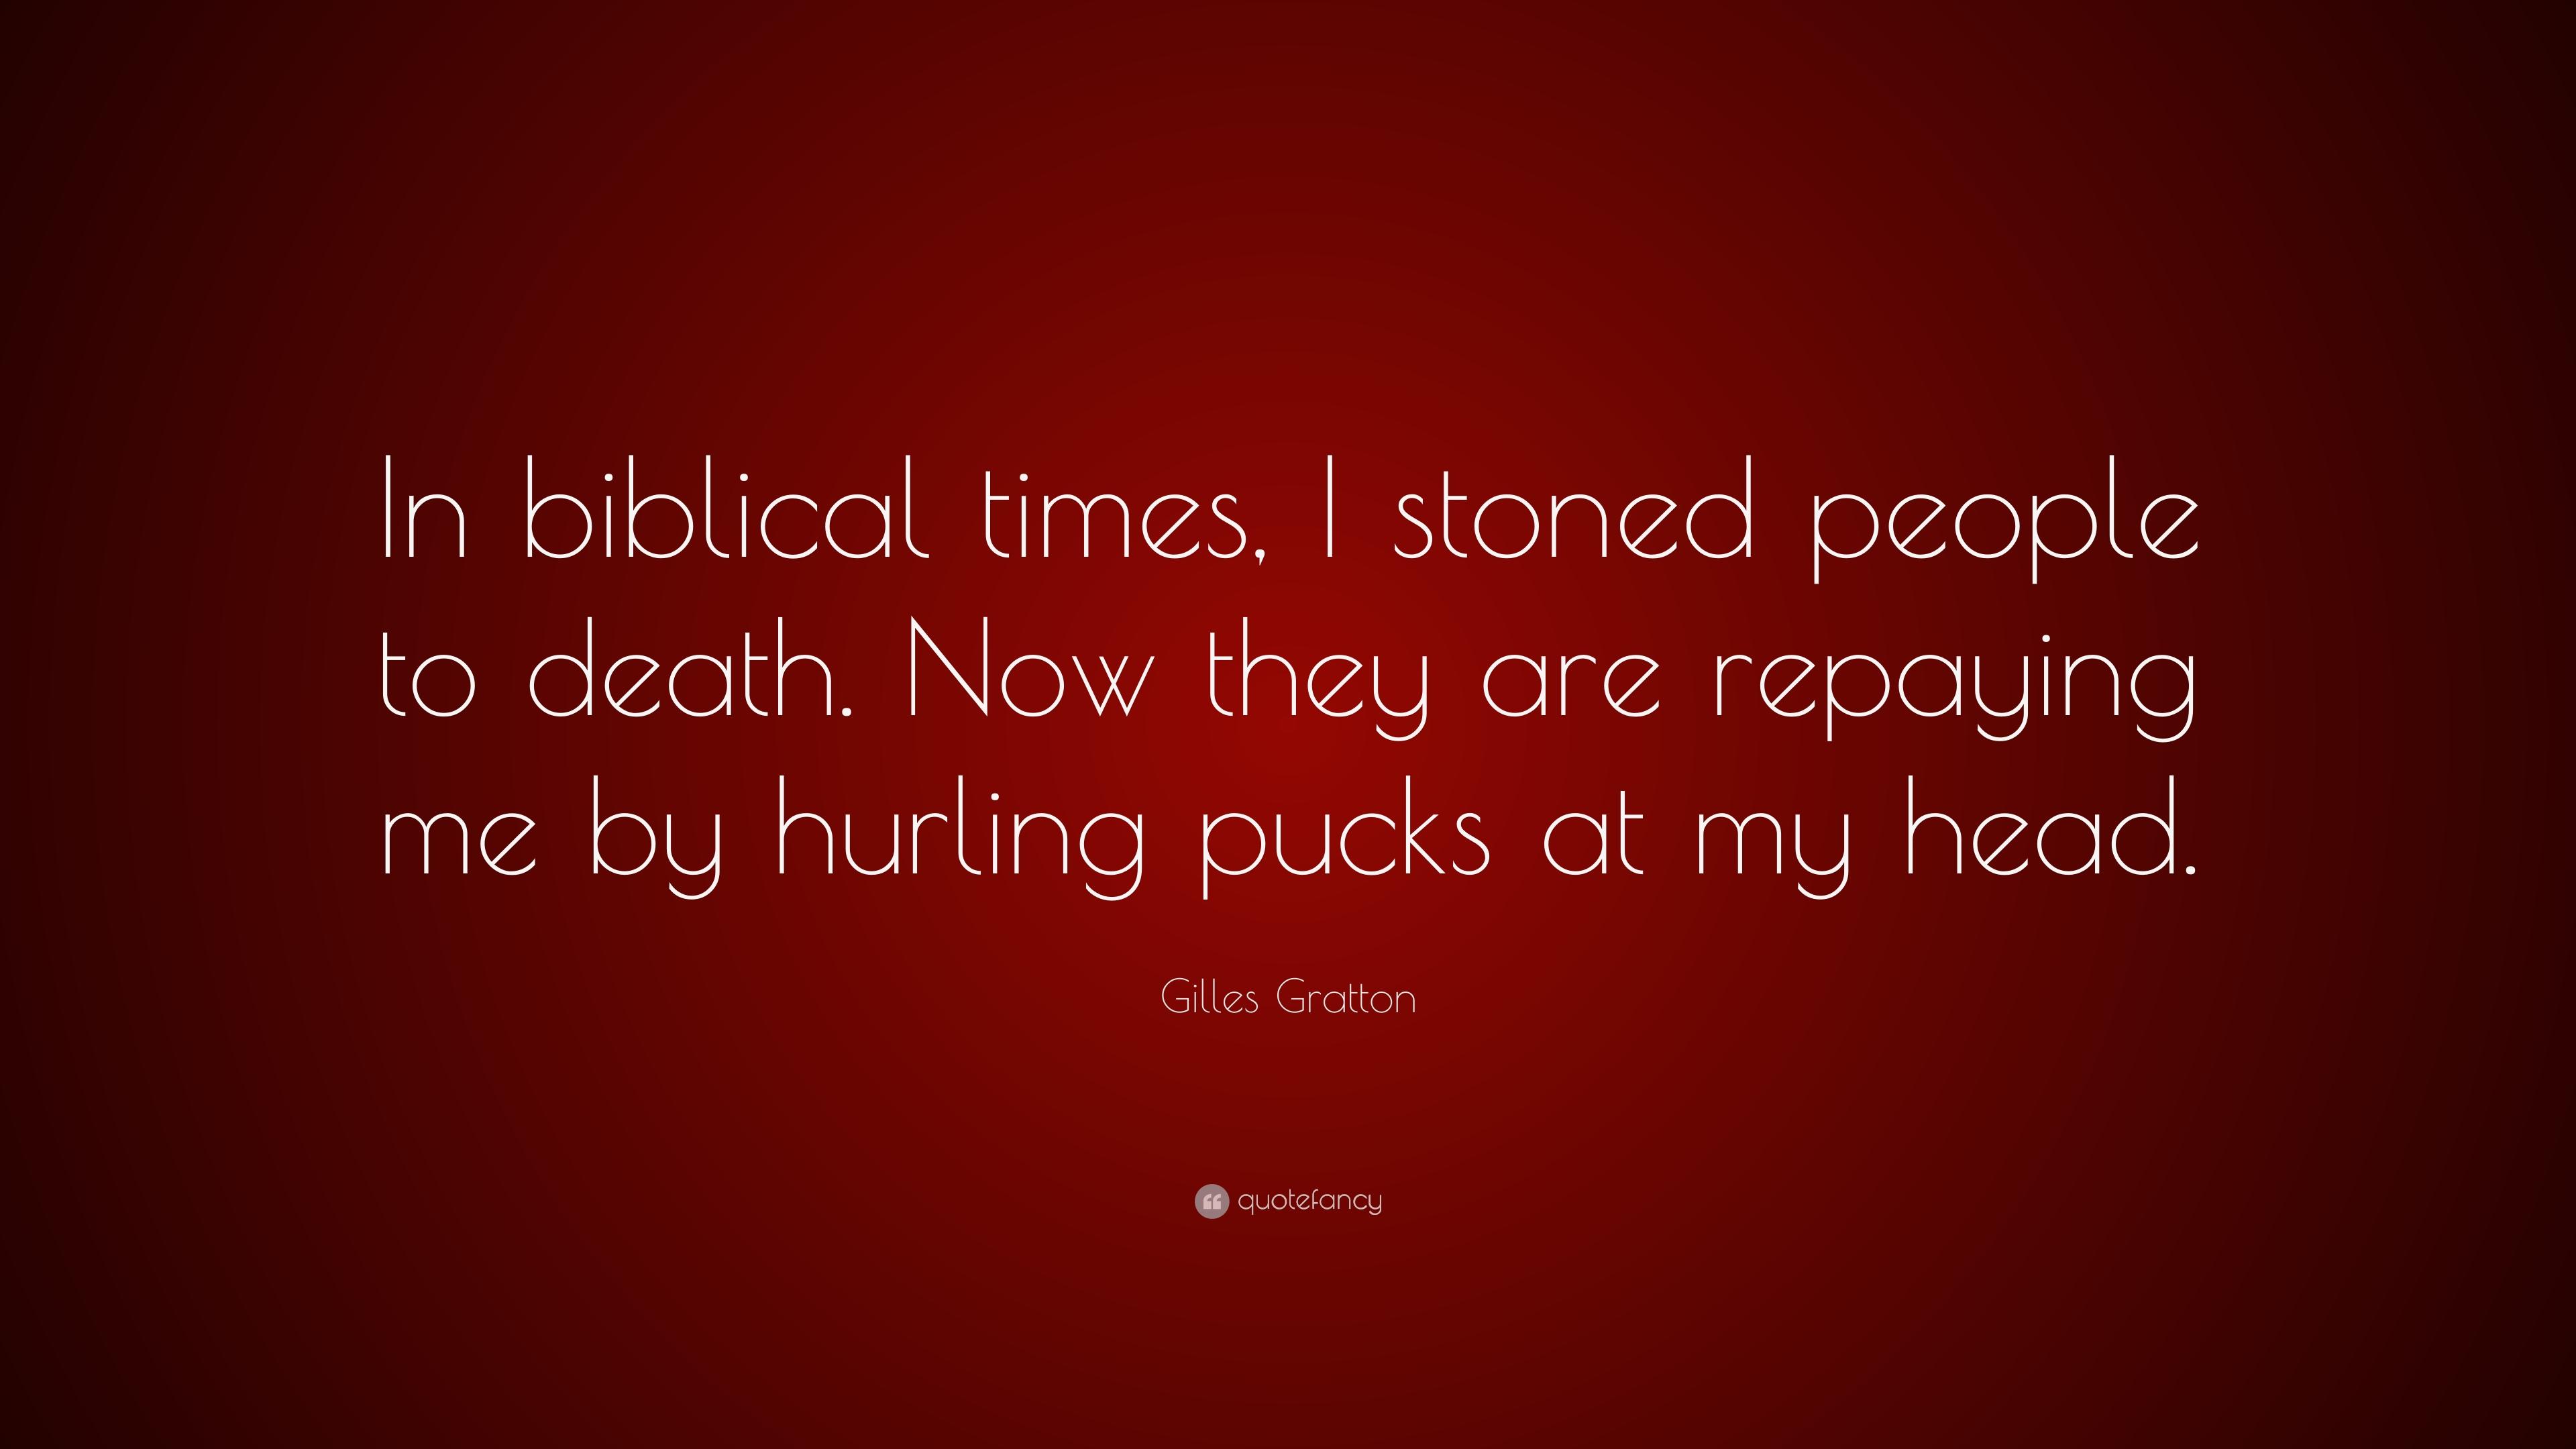 Gilles Gratton Quote: “In biblical times, I stoned people to death